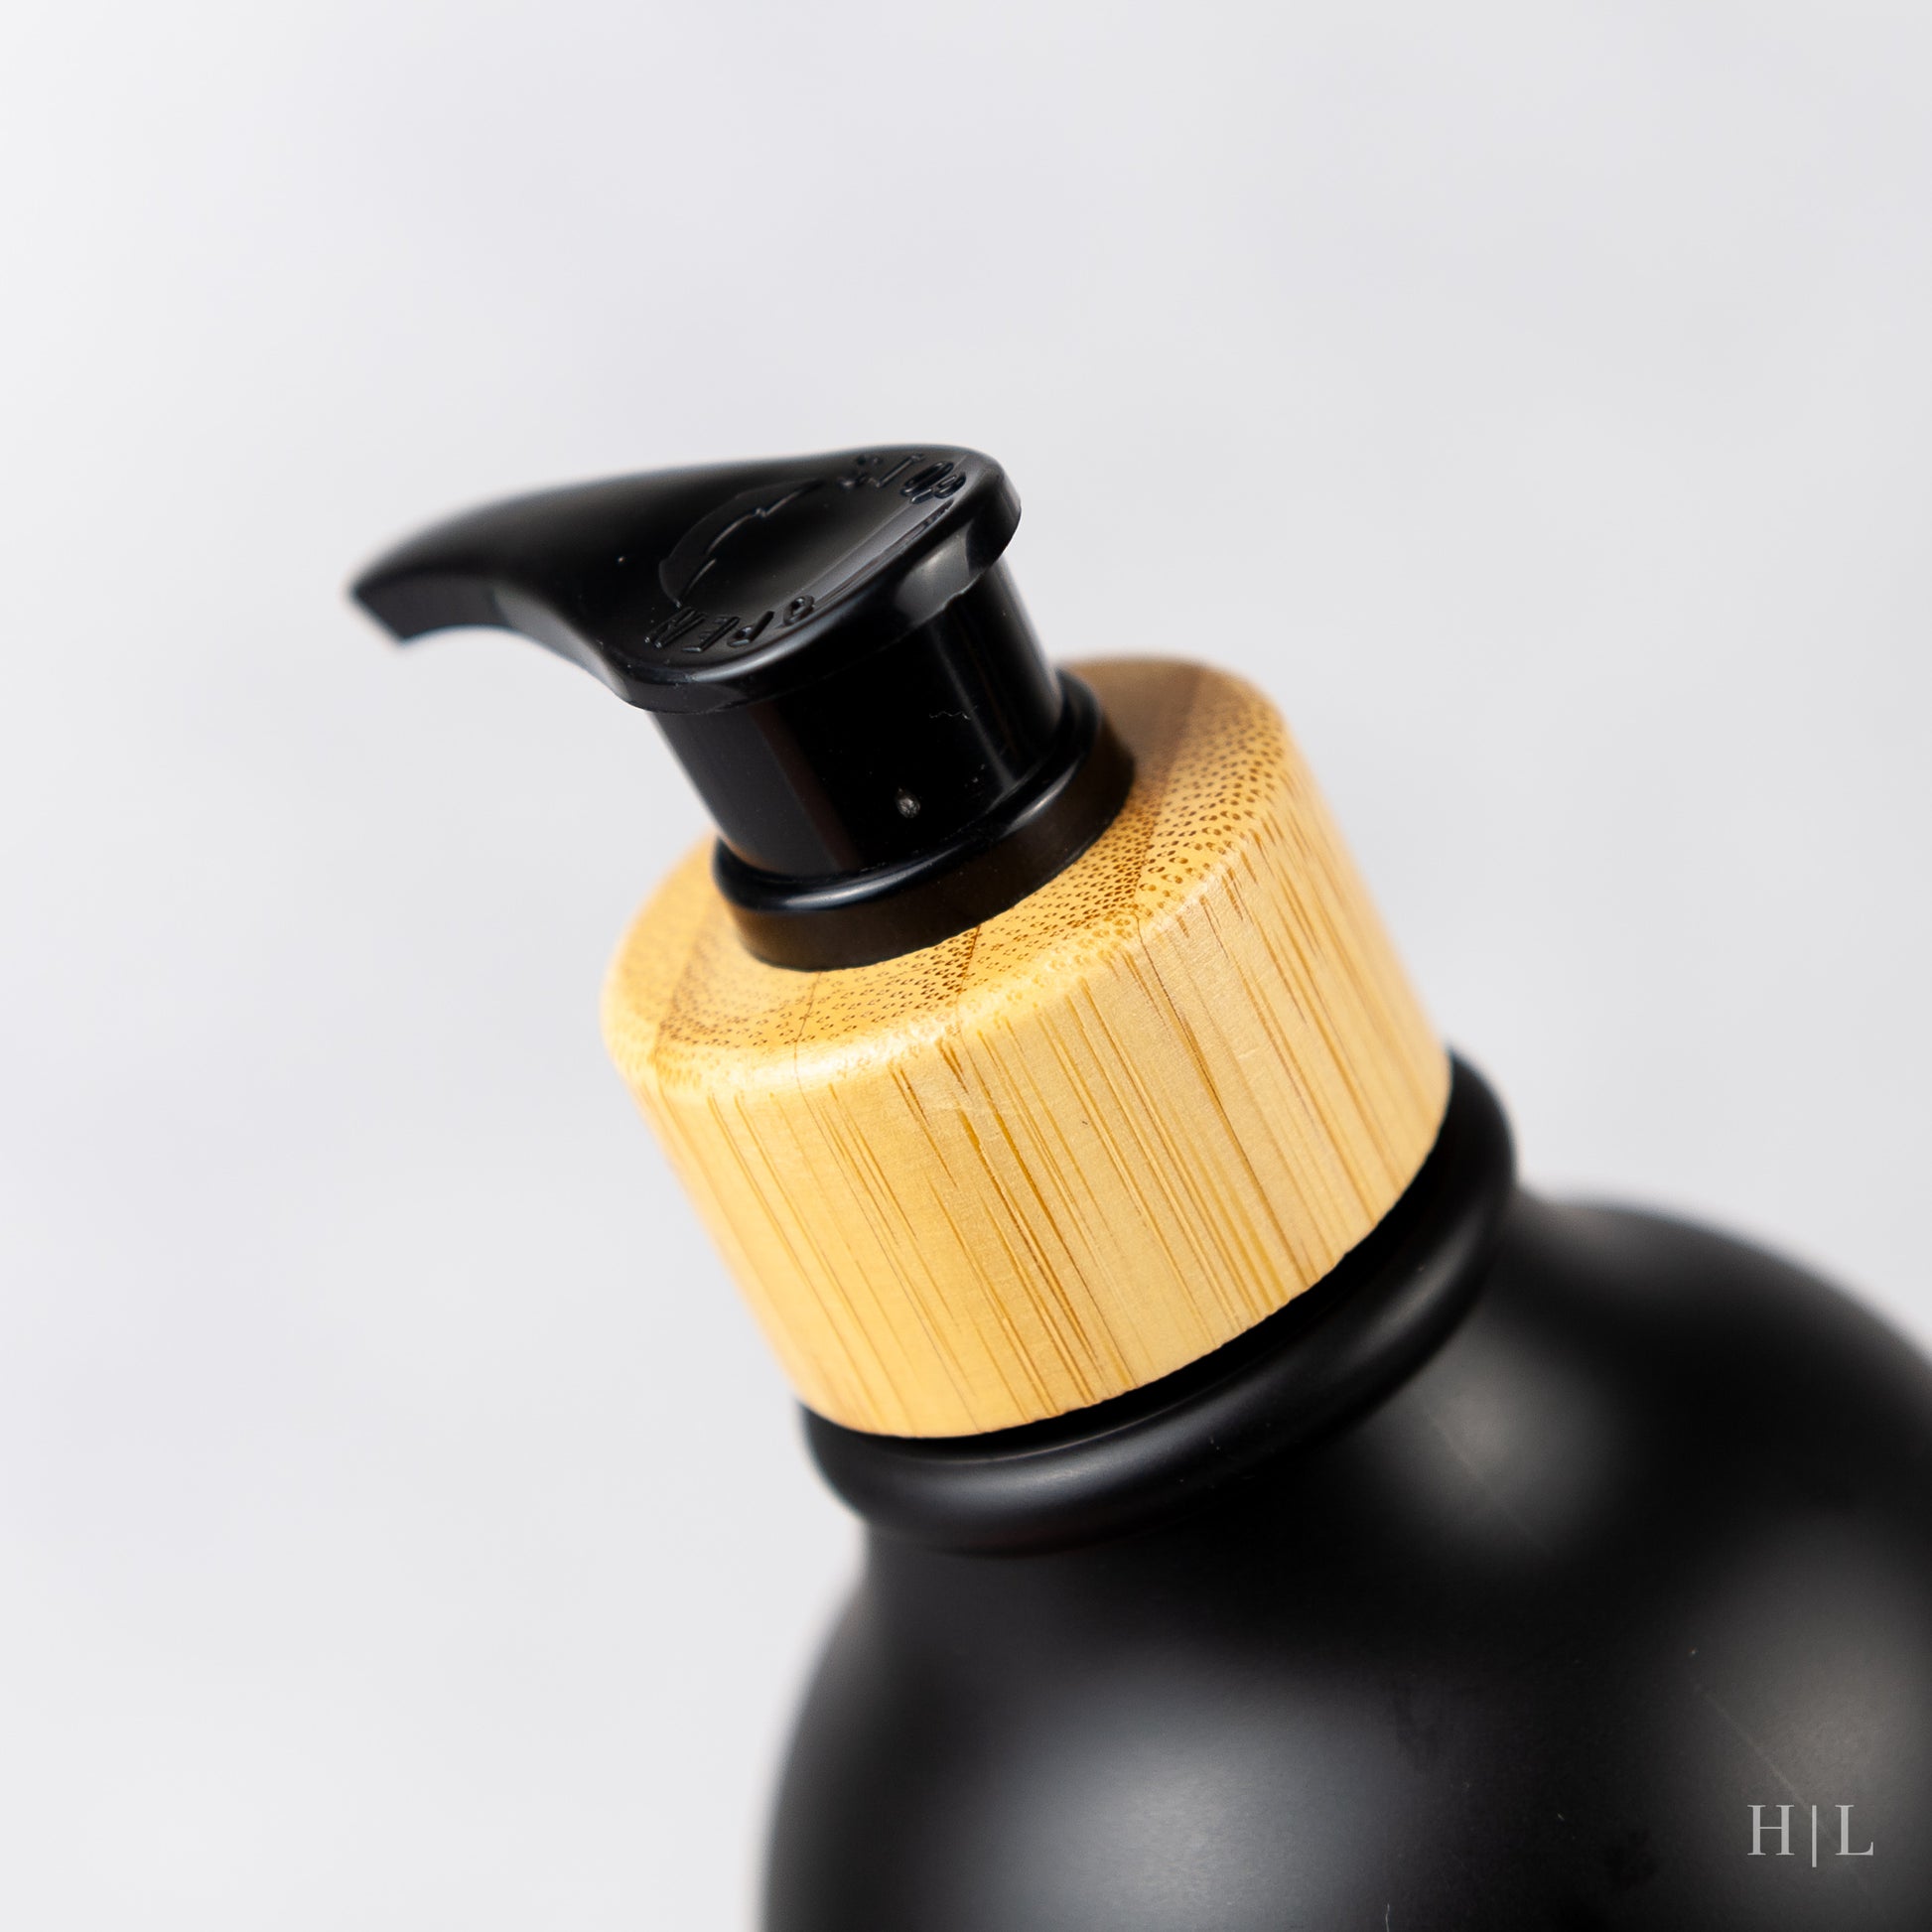 a black bottle with a wooden lid and a black cap